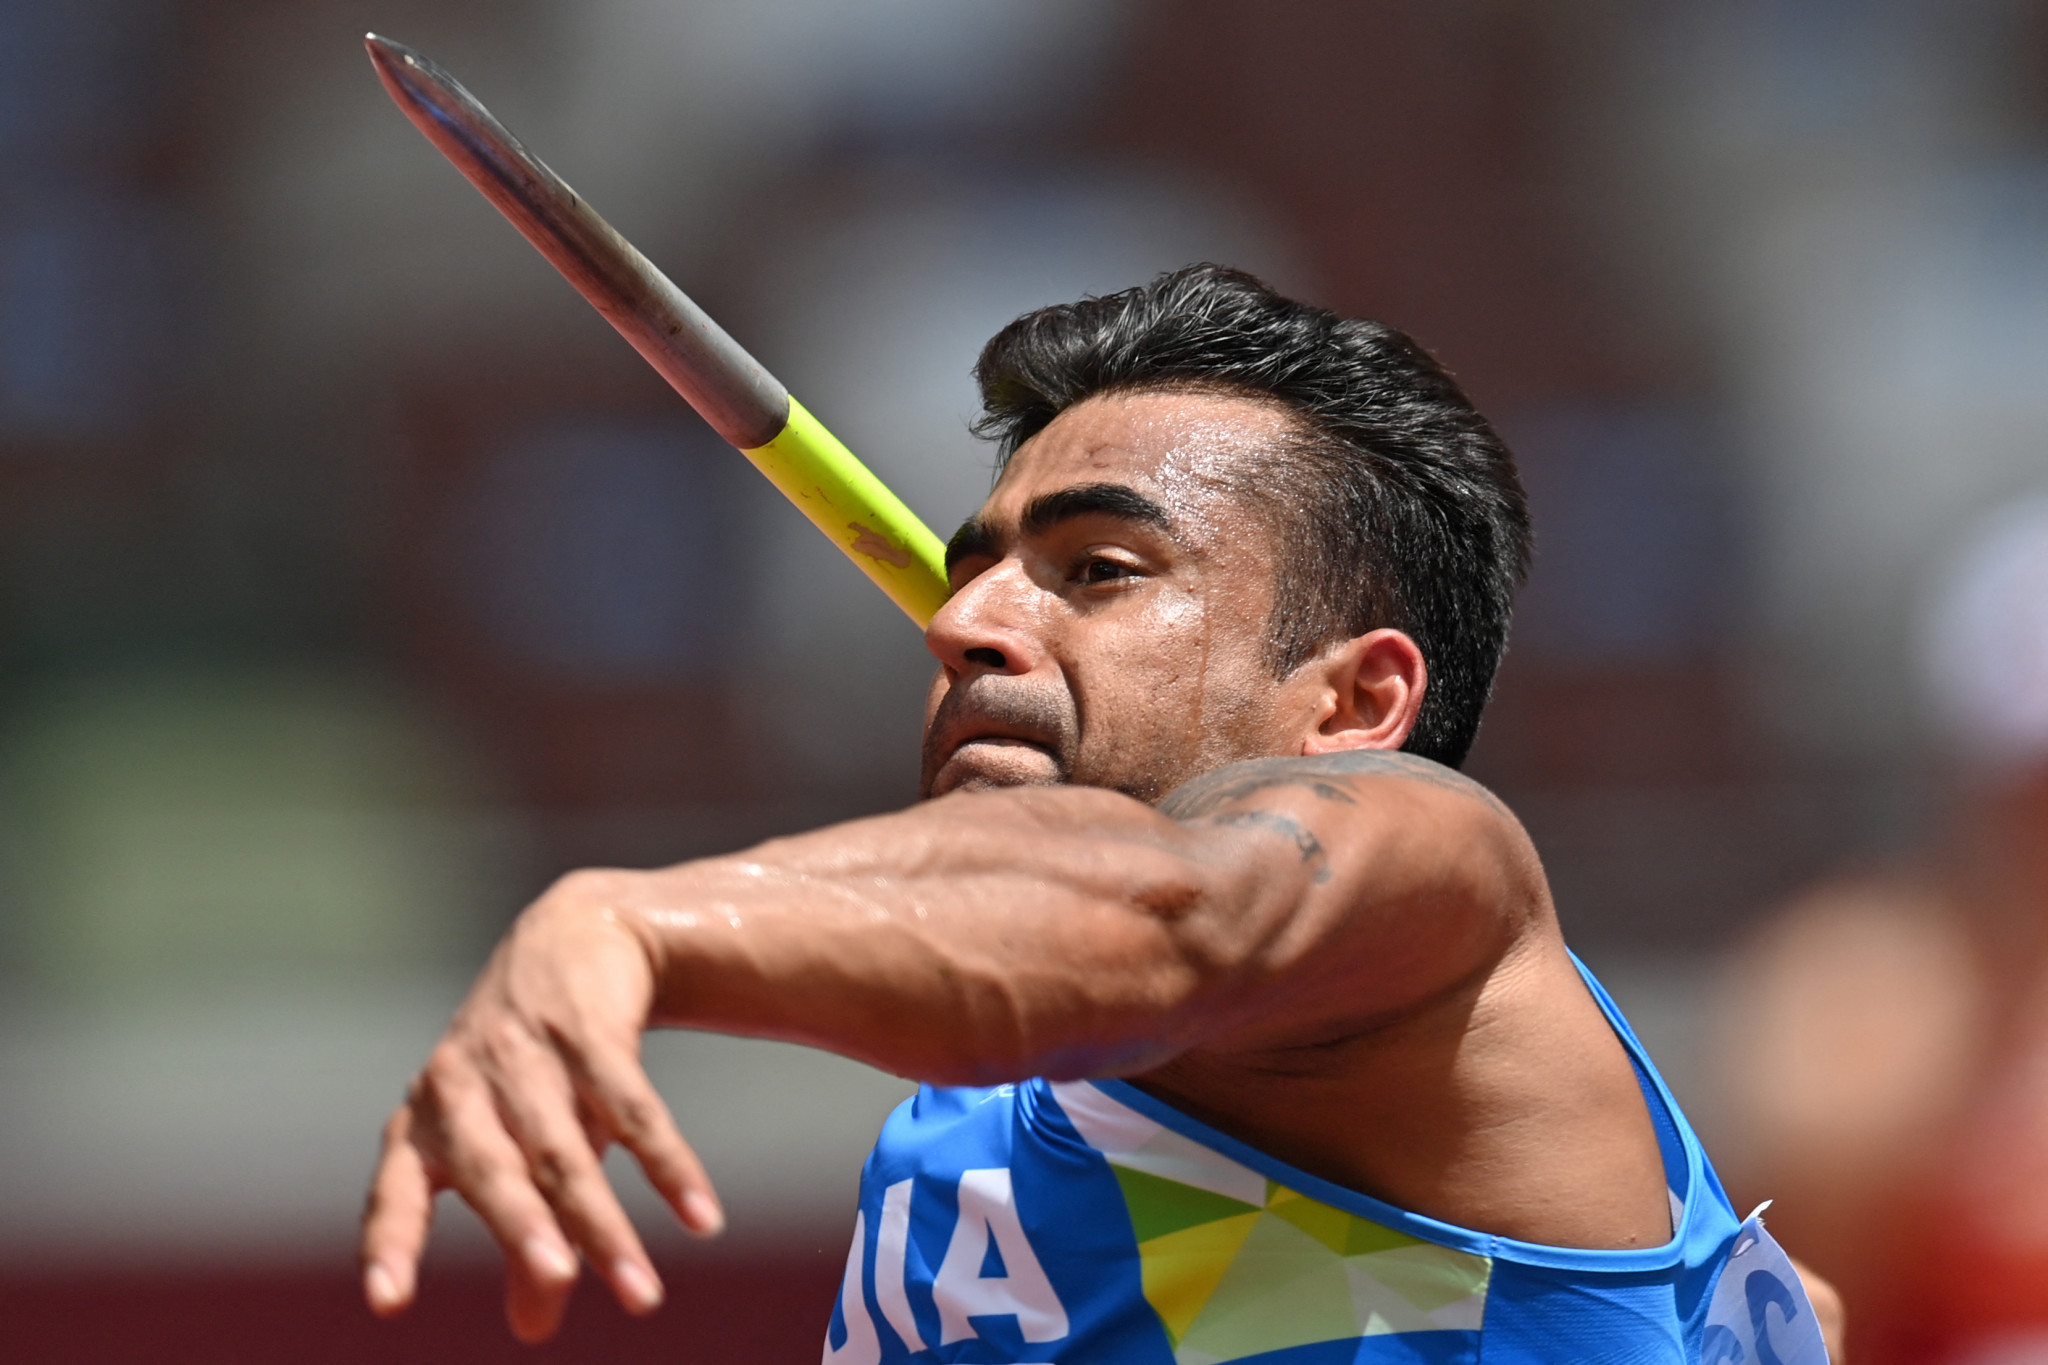 Indian javelin thrower Shivpal Singh has had a four-year doping ban reduced to one by his country's National Anti-Doping Agency ©Getty Images